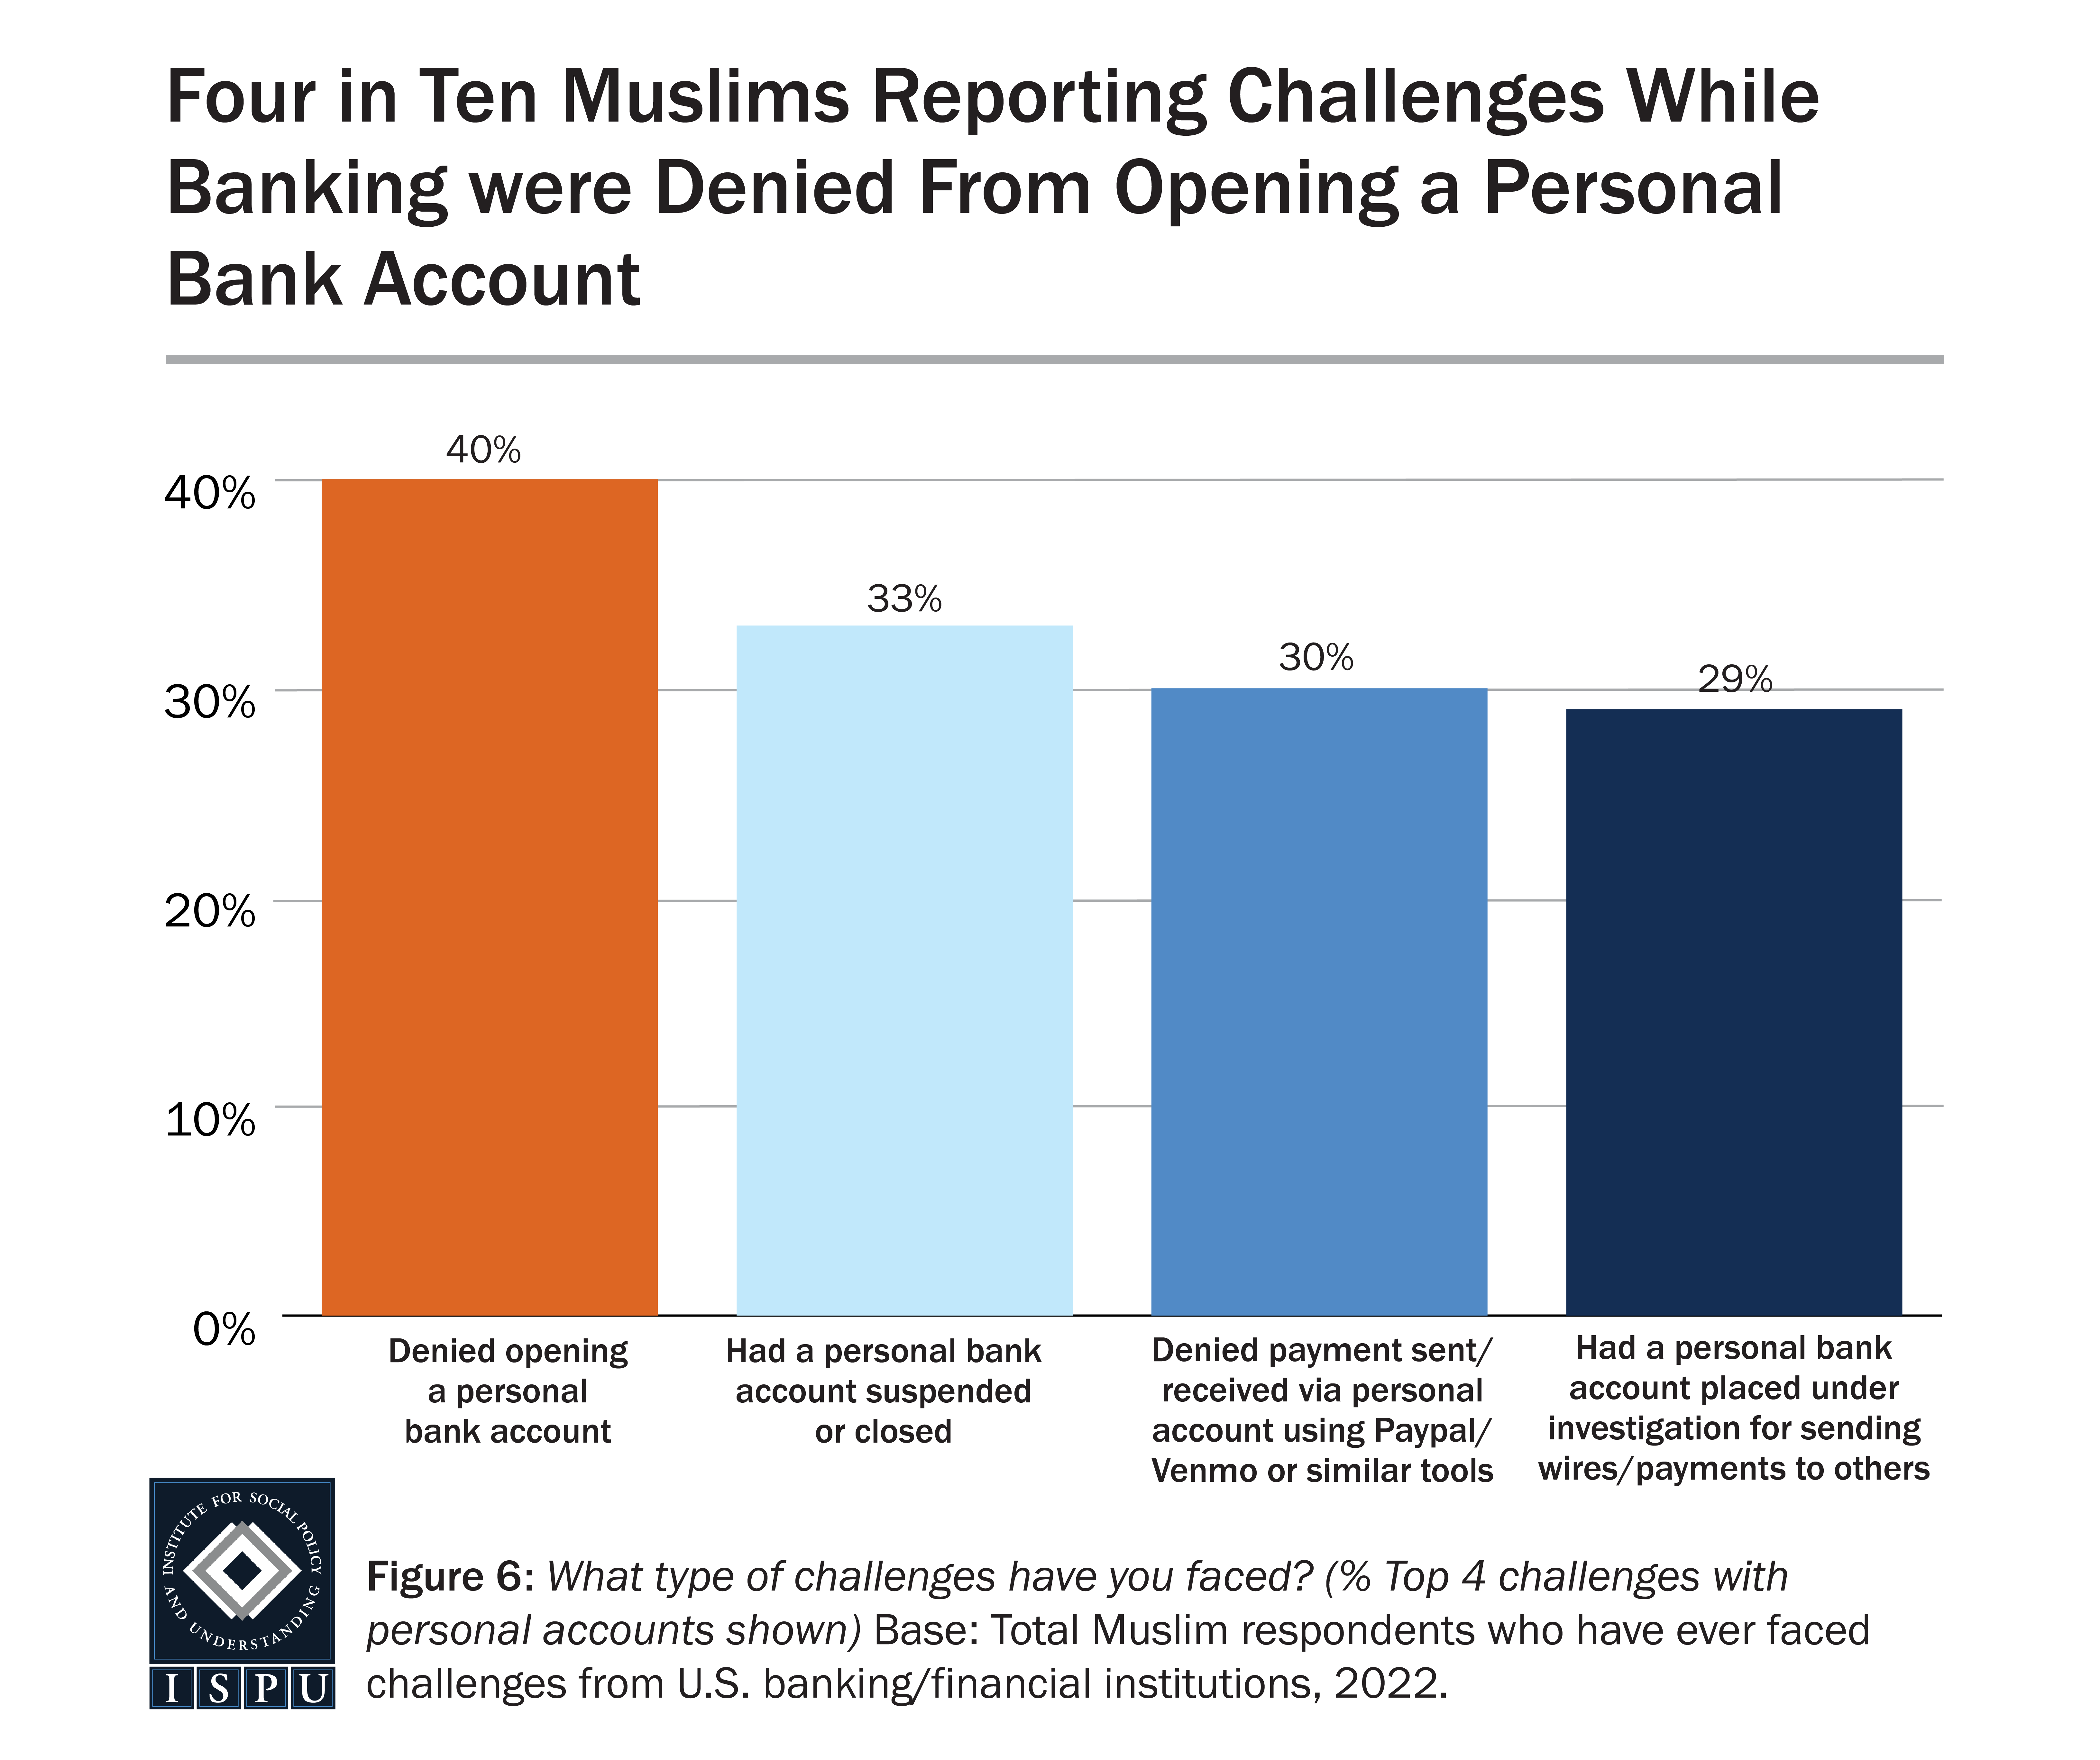 A bar graph showing the types of challenges faced with personal accounts among Muslims who reported facing challenges while banking.